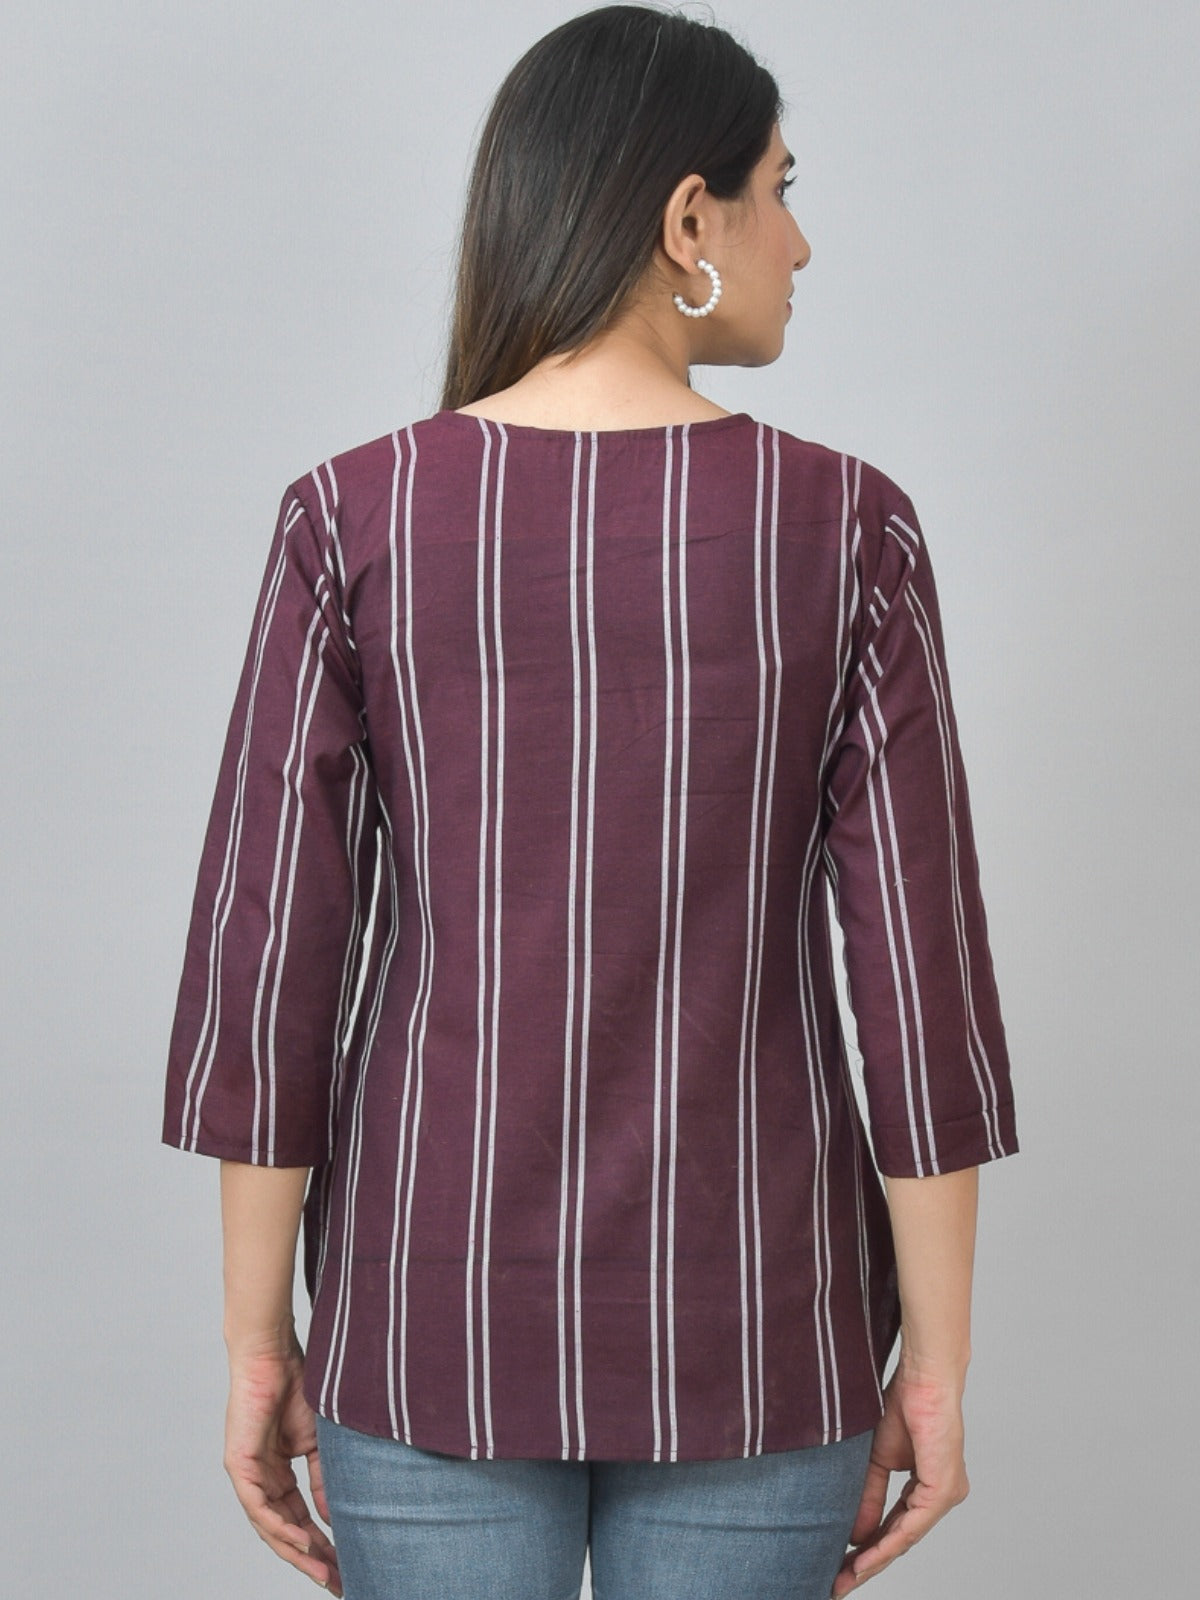 Pack Of 2 Dark Brown And Coffee Striped Cotton Womens Top Combo